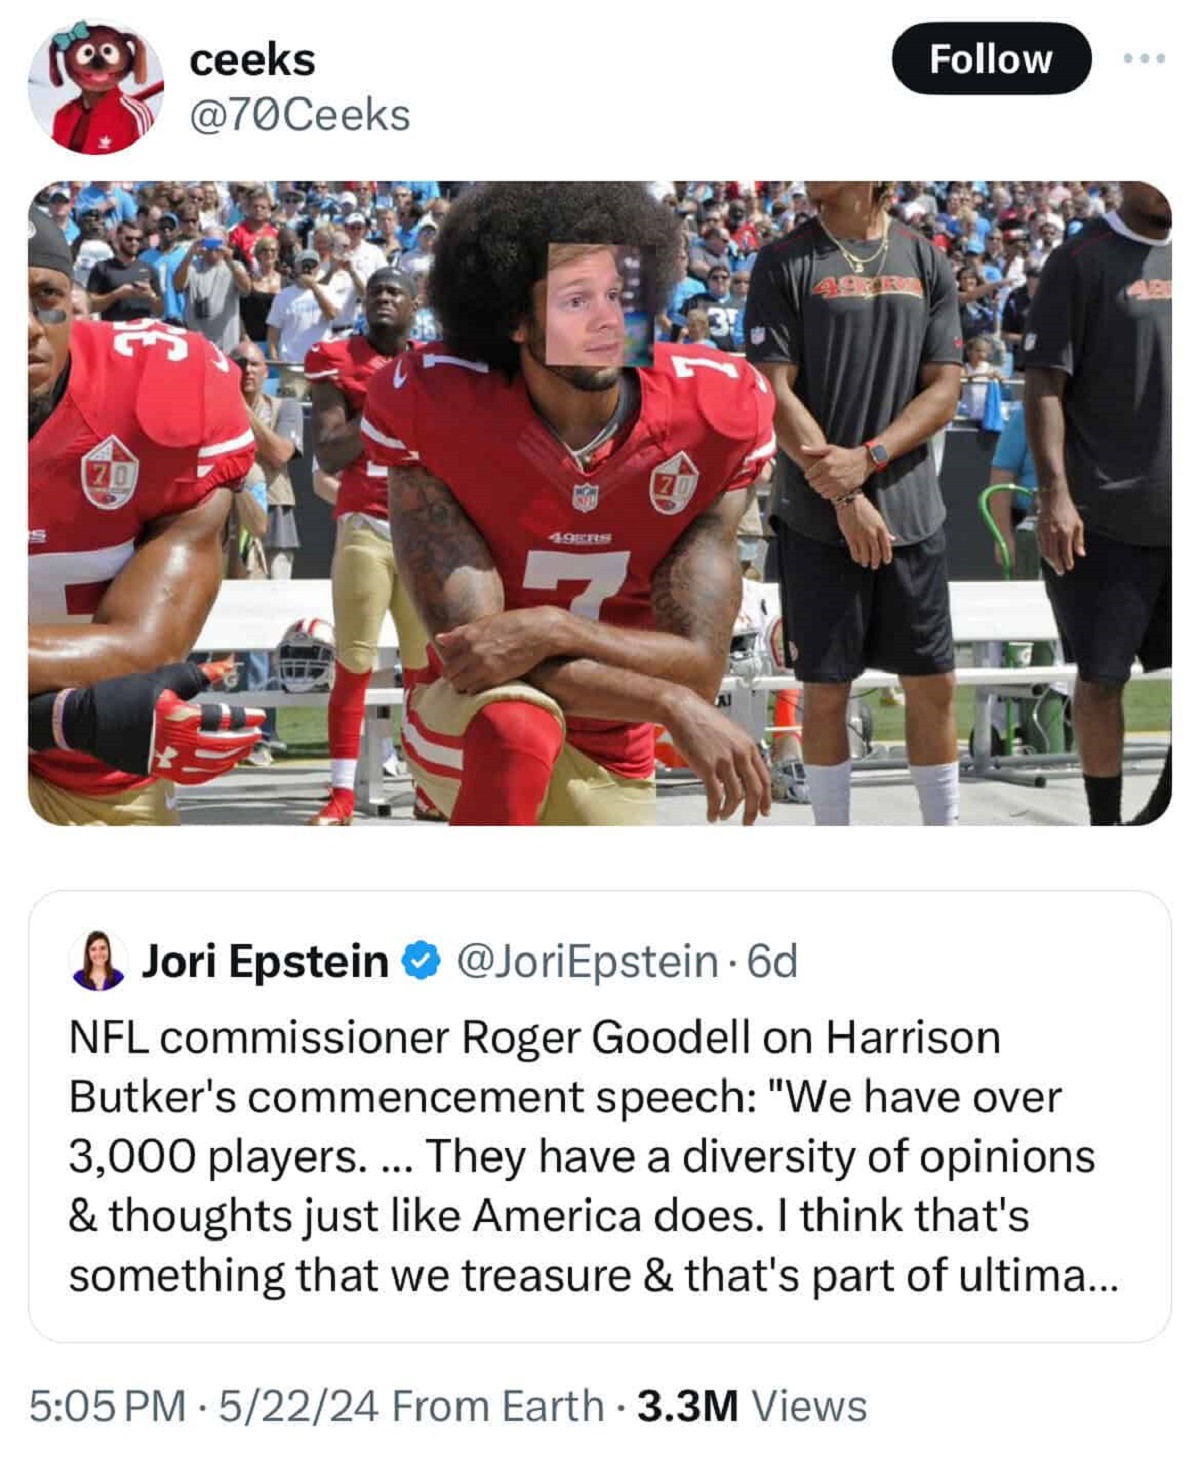 colin kaepernick kneeling - ceeks Jori Epstein 6d Nfl commissioner Roger Goodell on Harrison Butker's commencement speech "We have over 3,000 players... They have a diversity of opinions & thoughts just America does. I think that's something that we treas